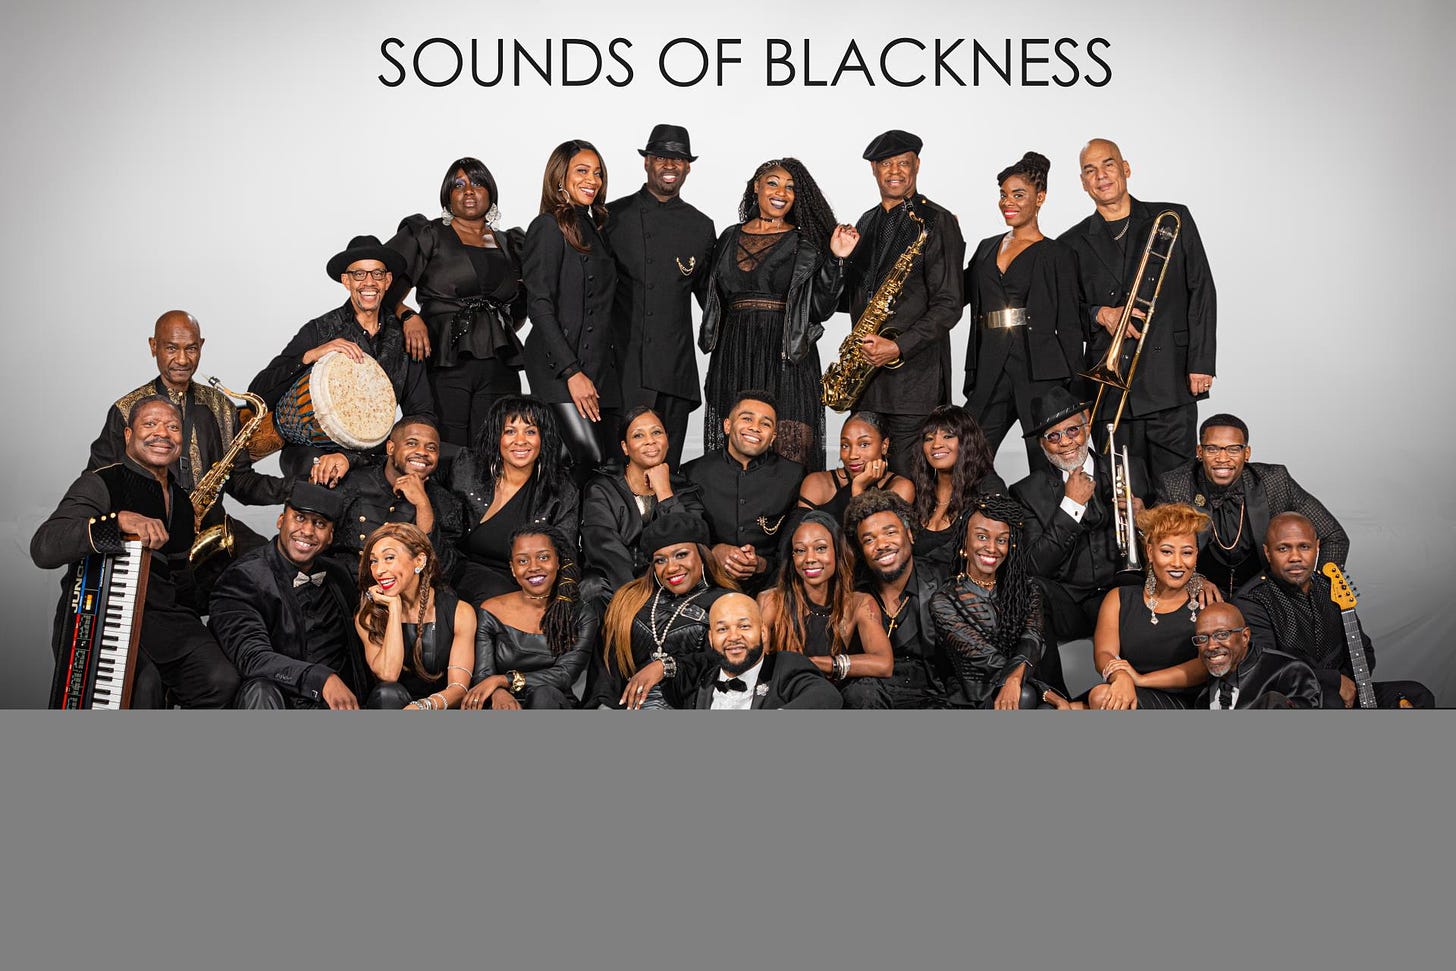 Sounds of blackness